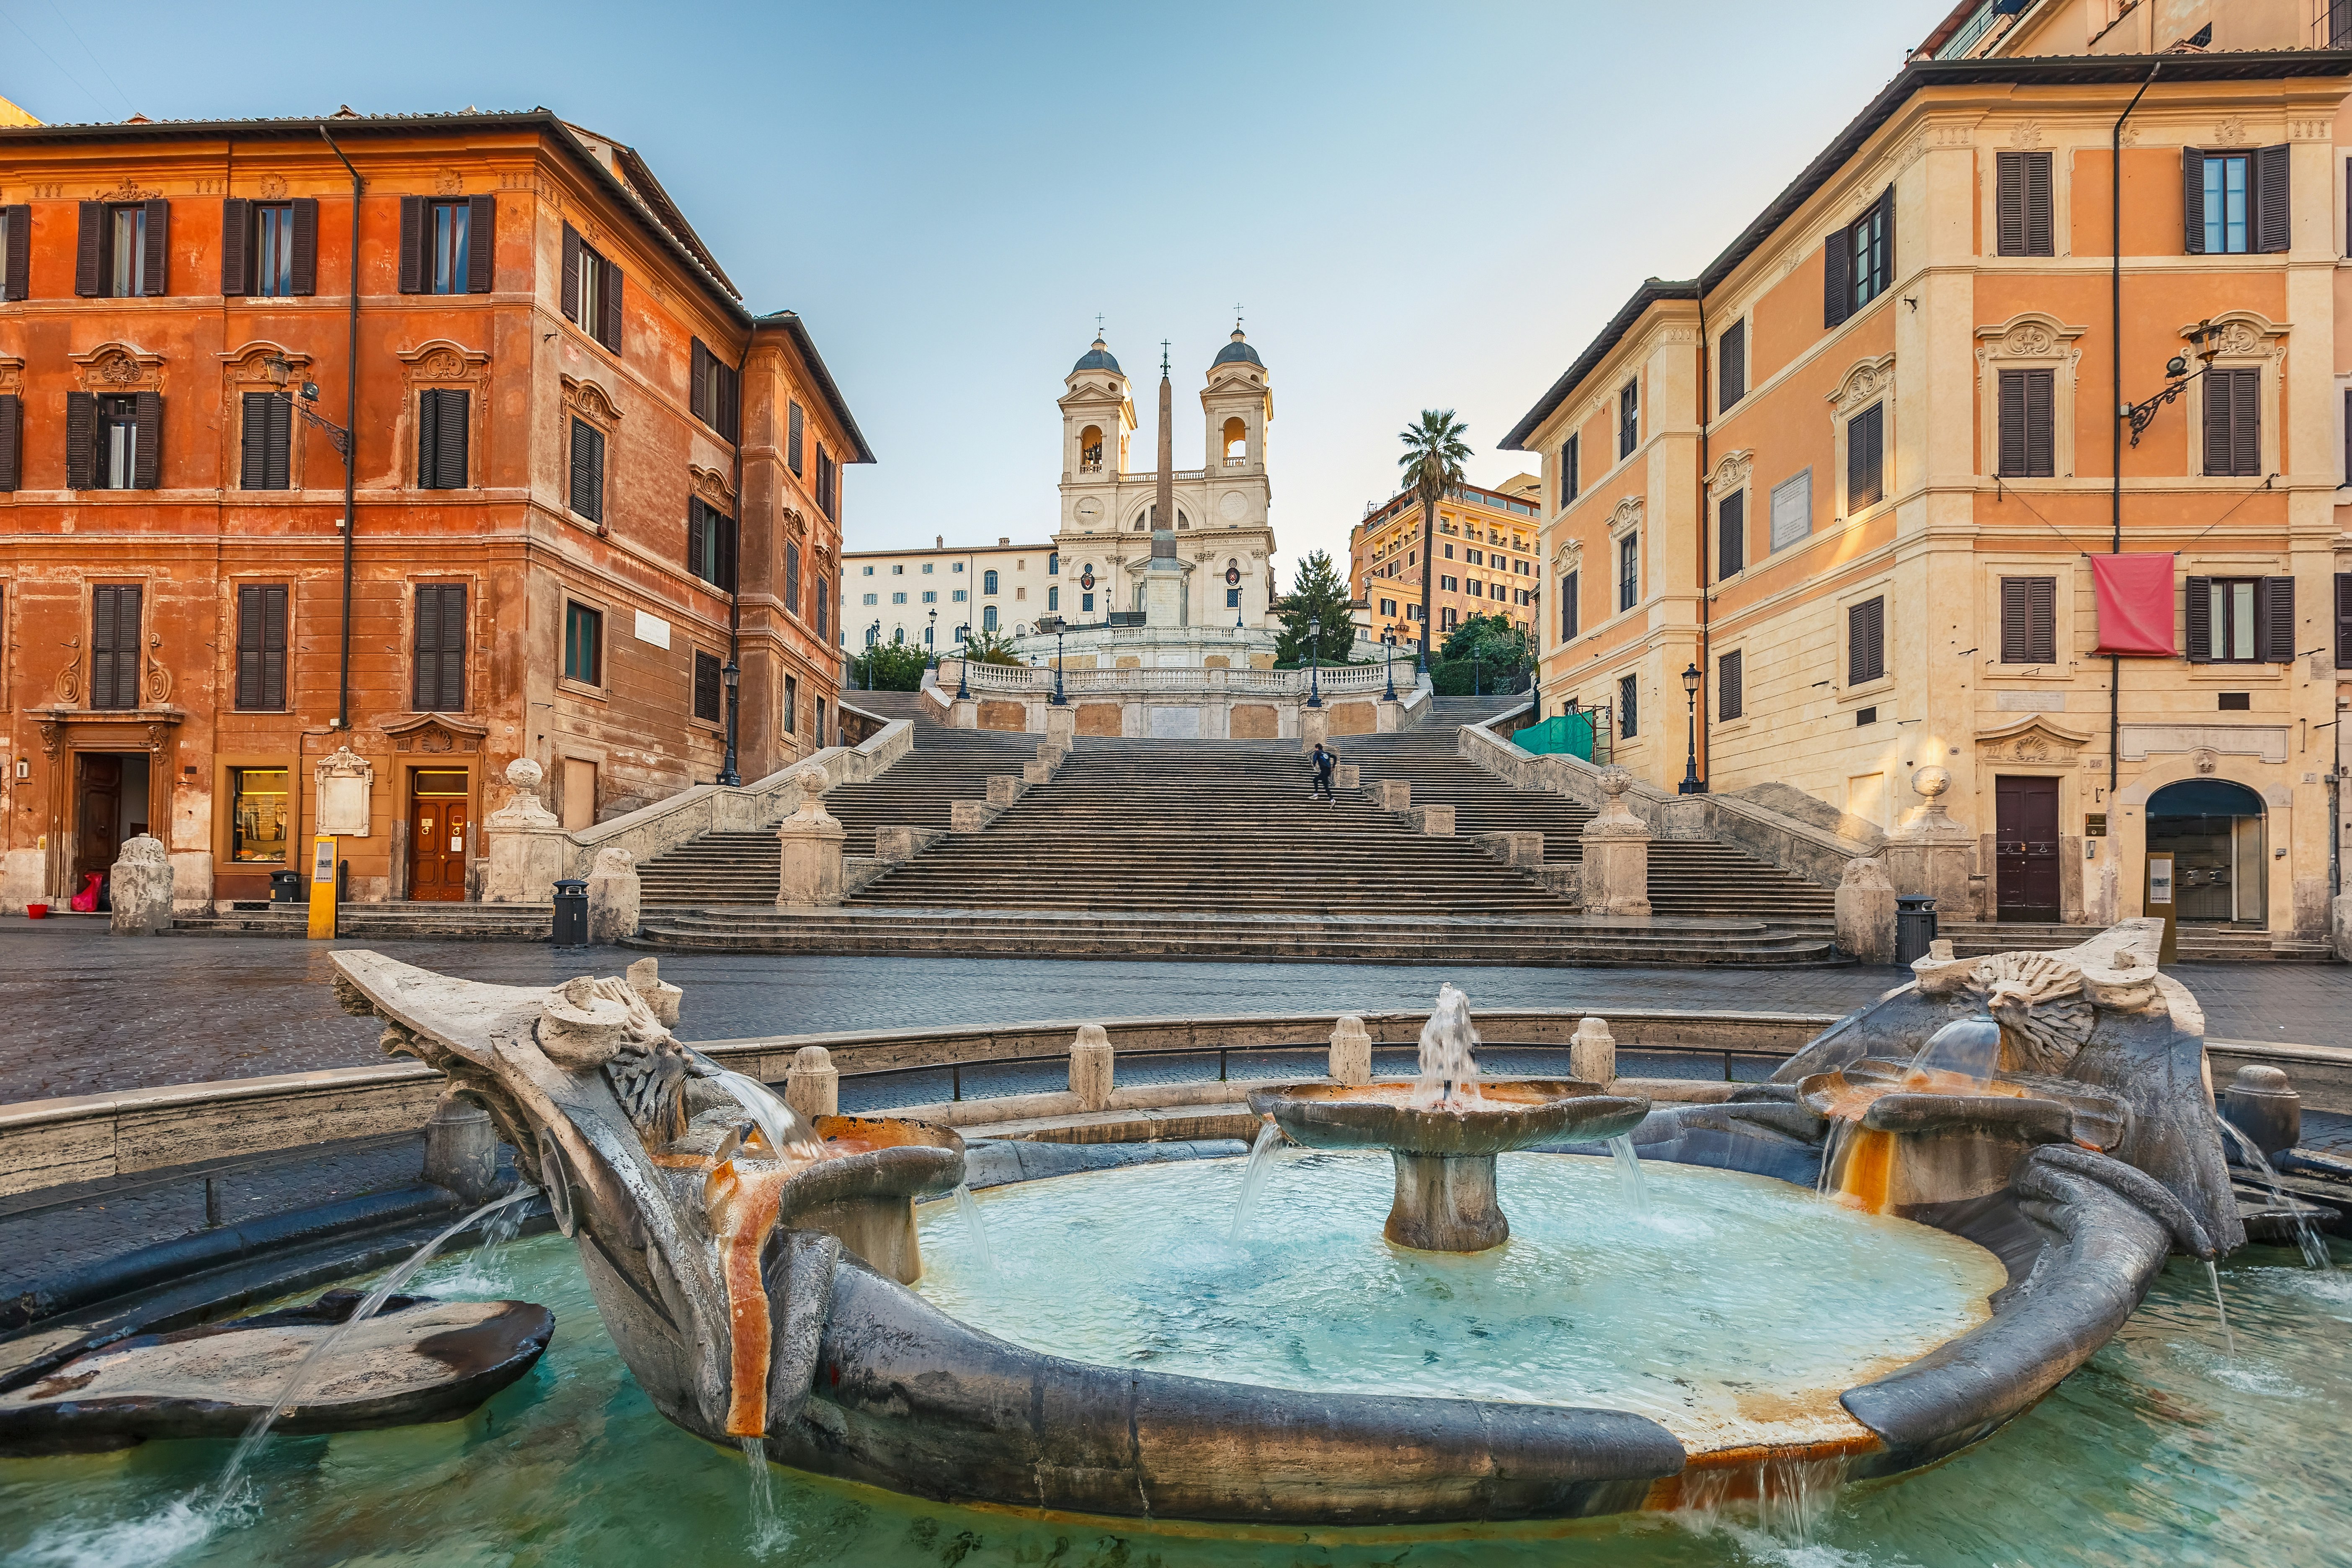 A picture of Rome's famous Piazza di Spagna with the fountain and the Spanish steps